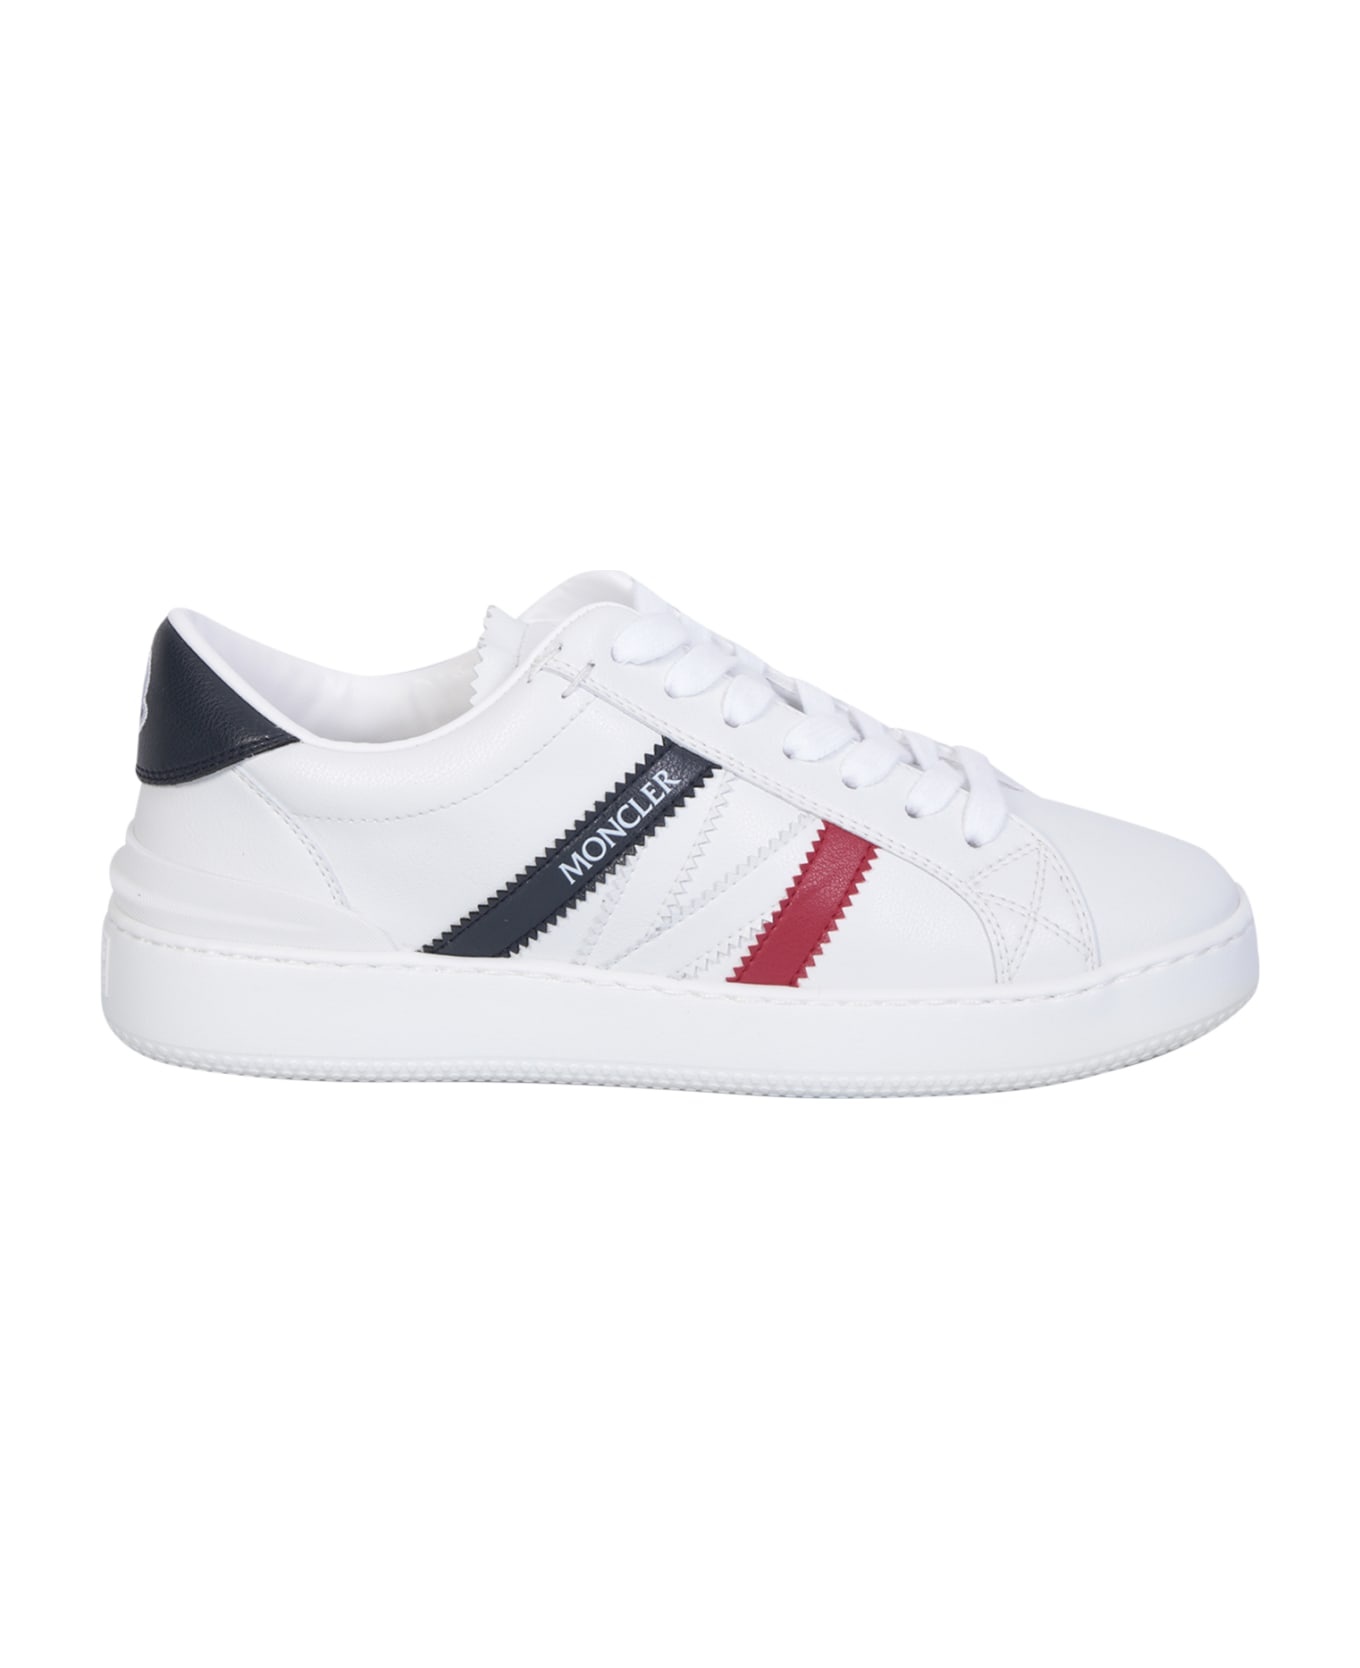 Monaco M Sneakers In White, Blue And Red - 1